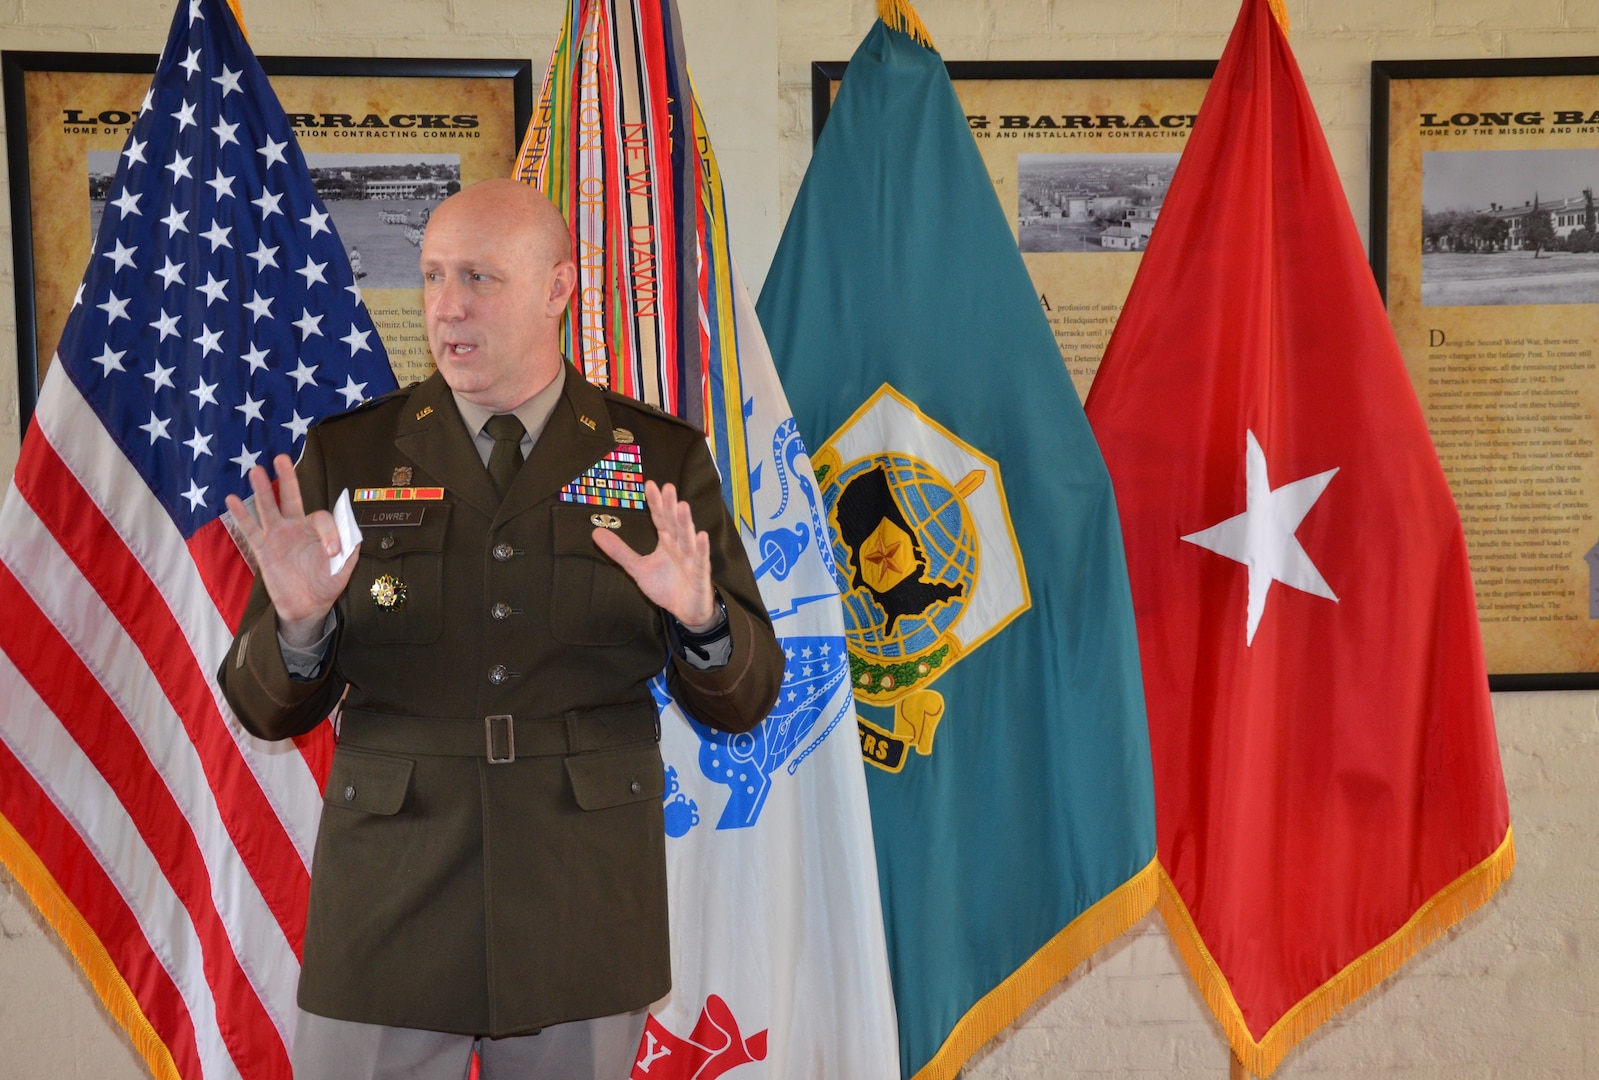 Army announces MICC leader confirmation for second star